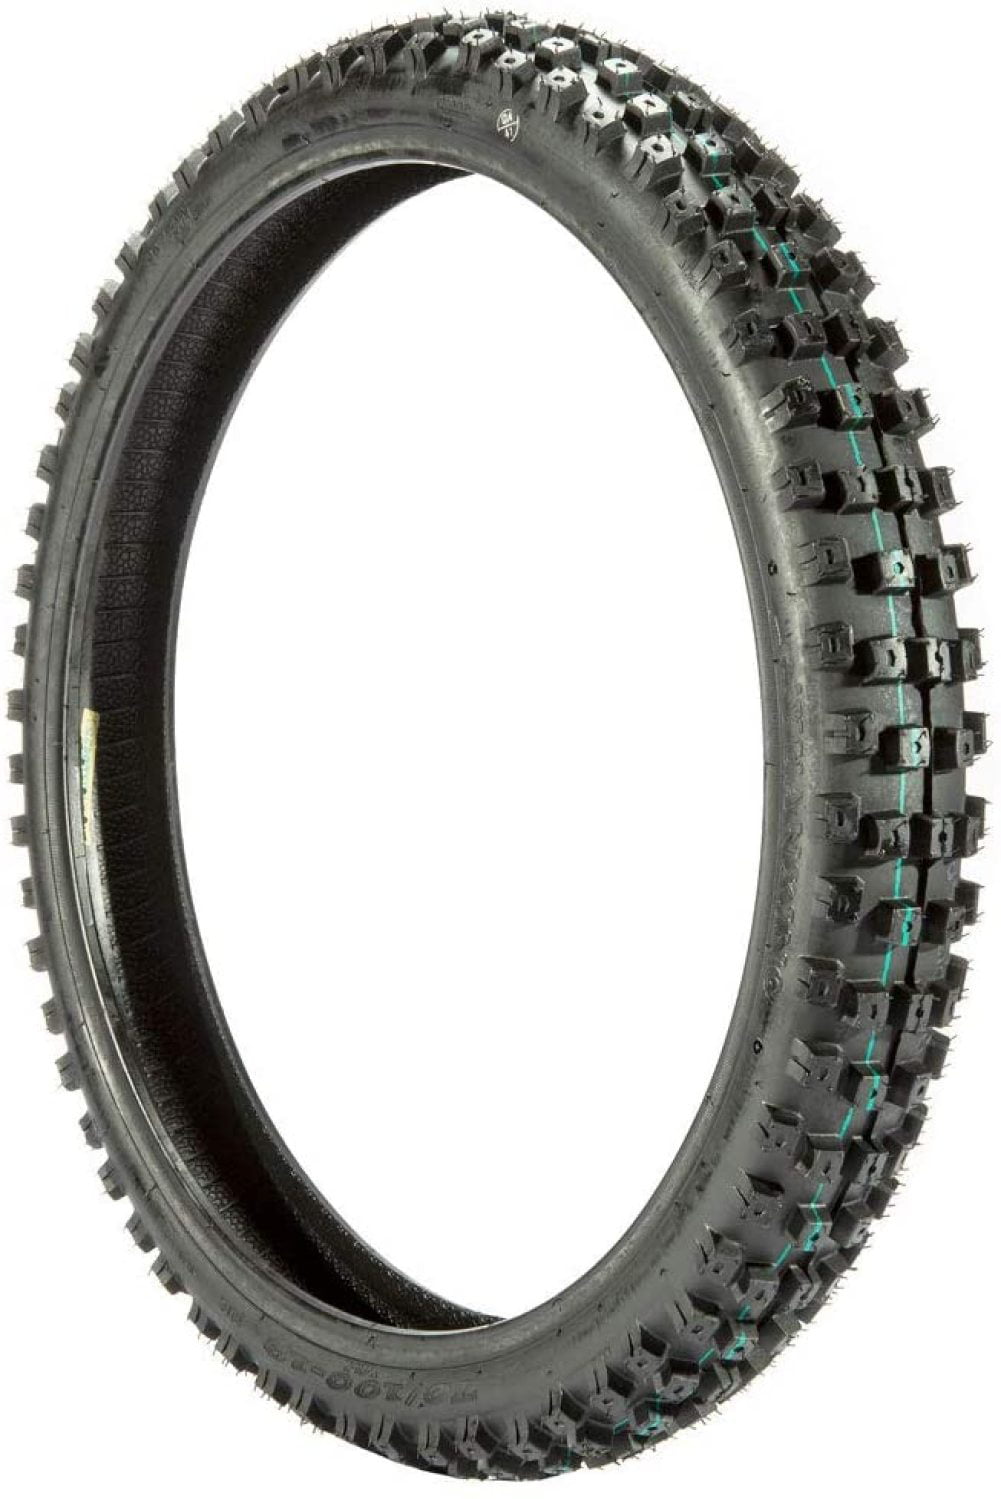 Dirt Bike Tire 70/100-19 Model P88 Front or Rear Off-Road Fits on Yamaha TT-R125L/LE 2000-10 